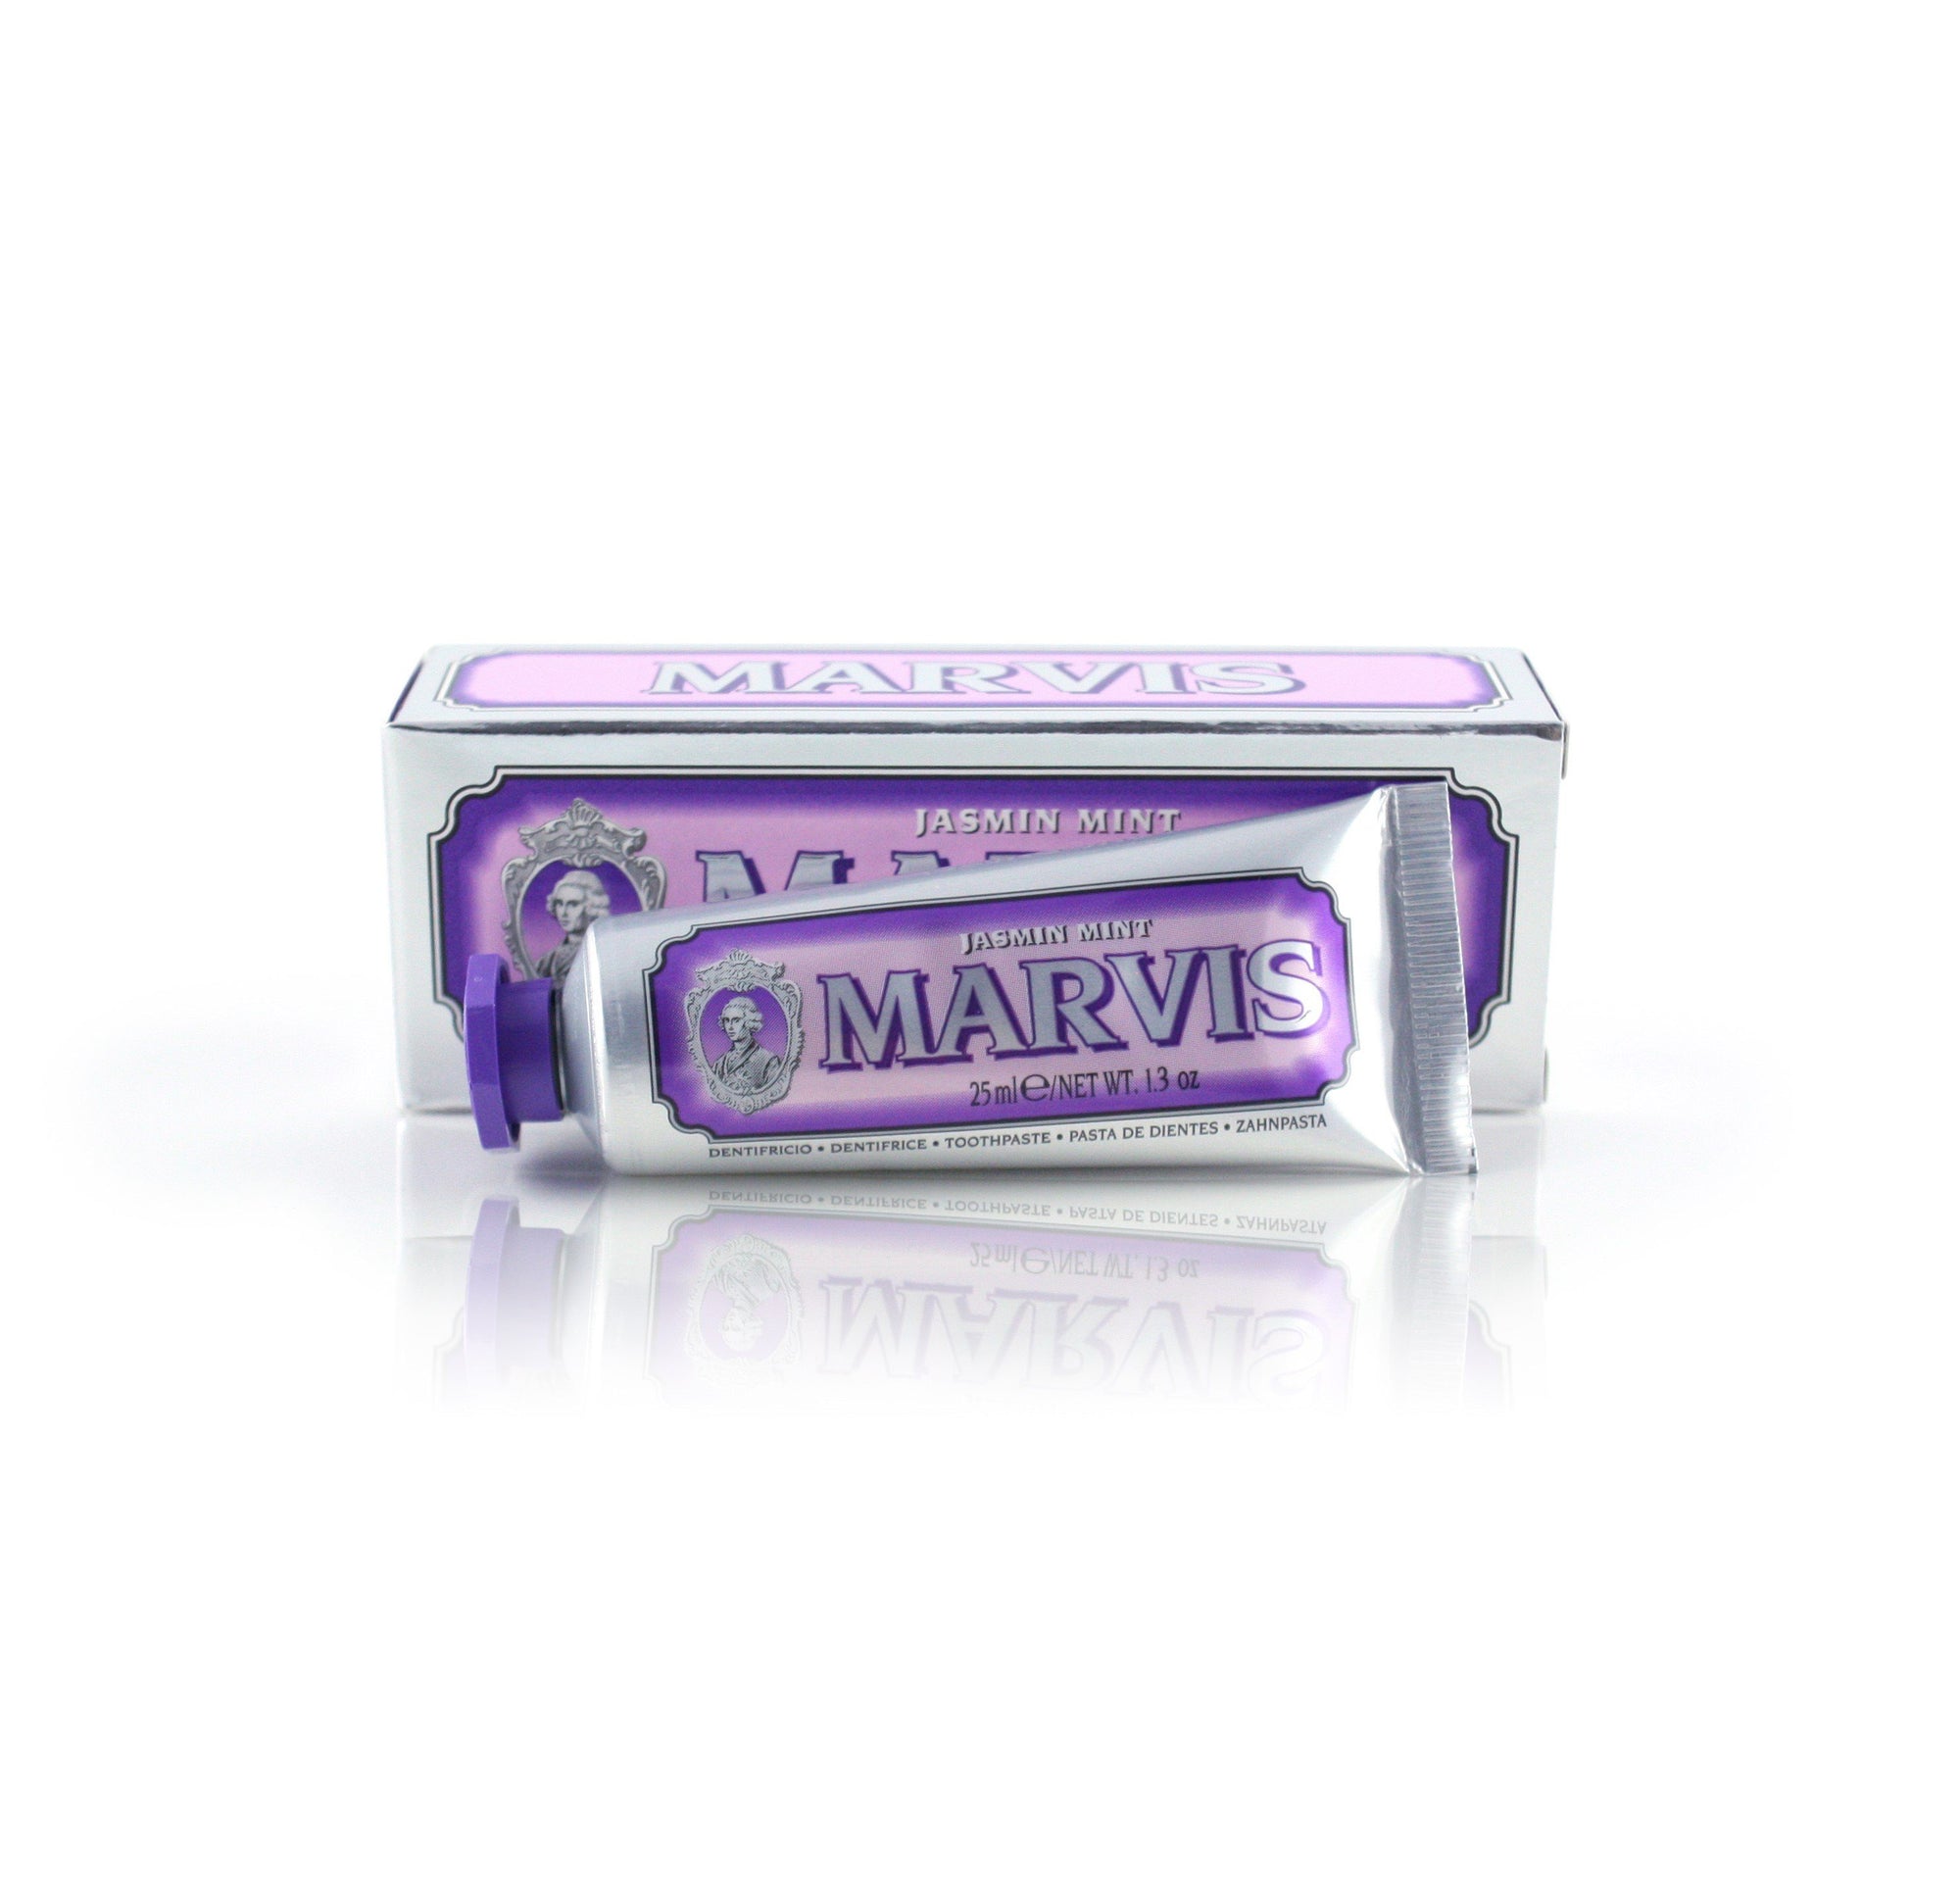 Marvis - Jasmine Mint Toothpaste - Travel Size - Soap & Water Everyday